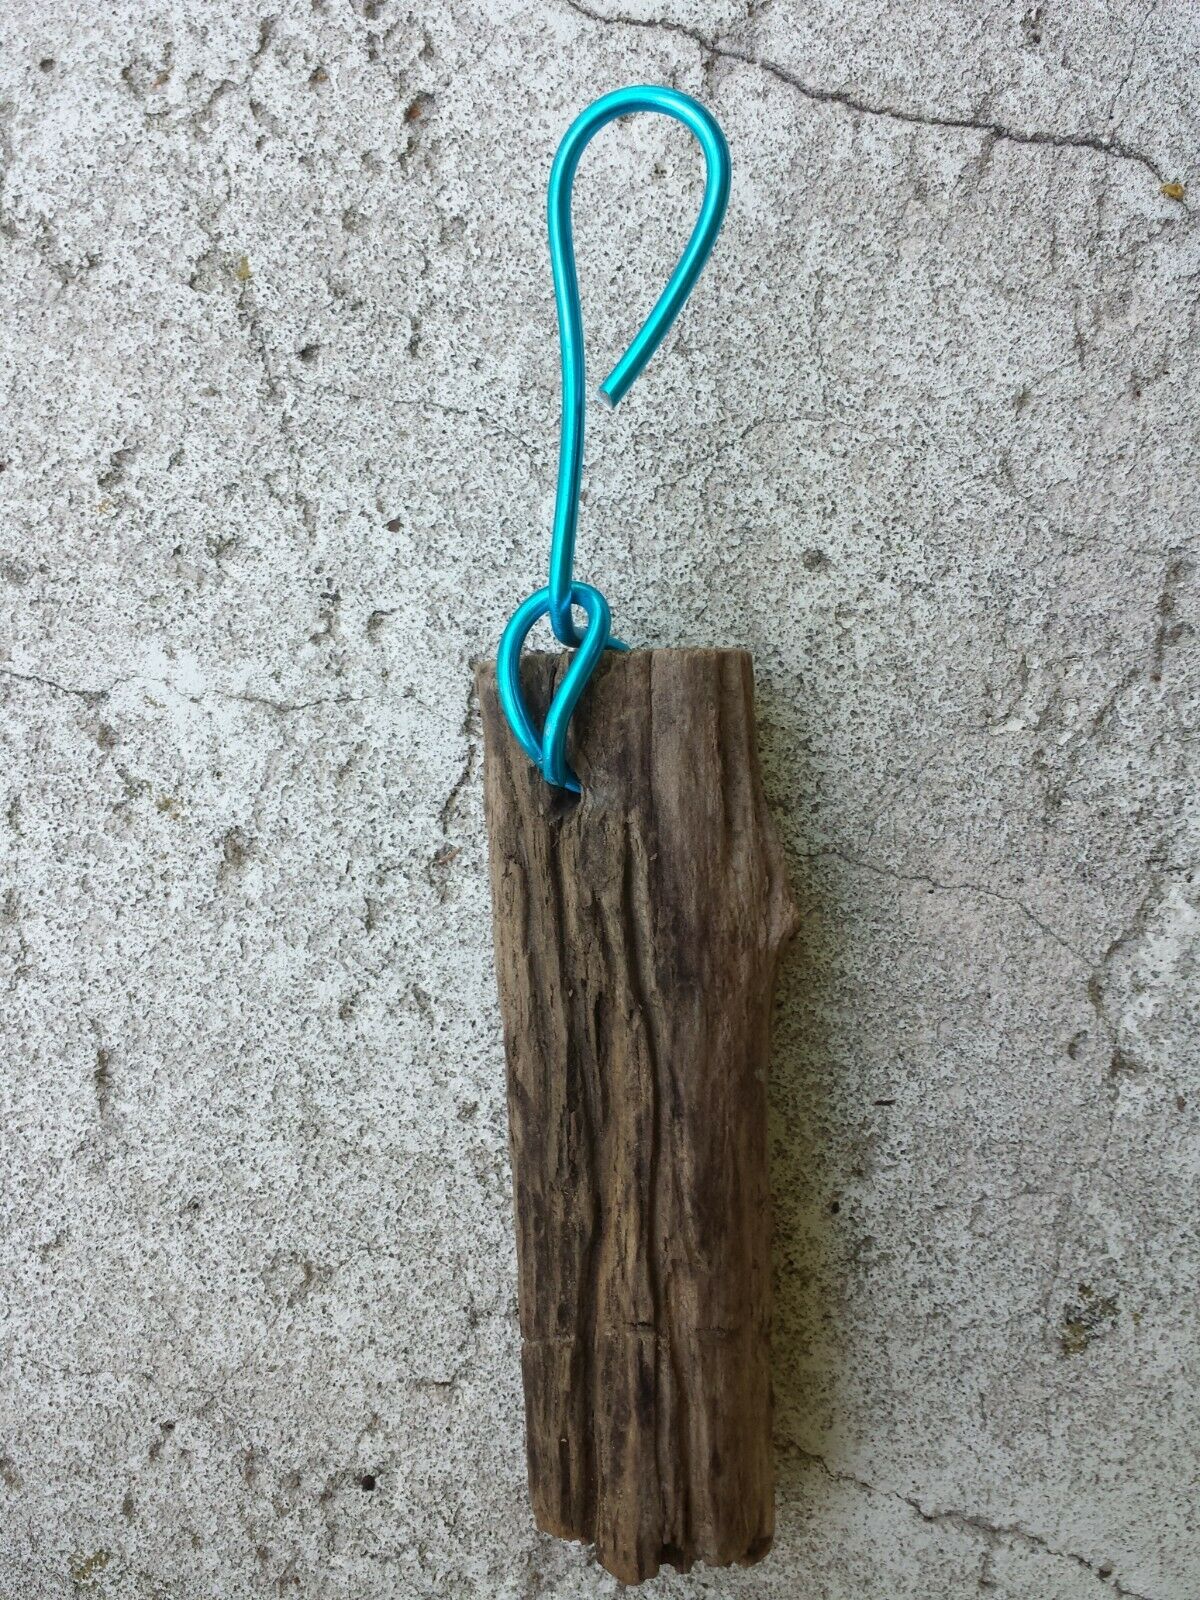 Drift wood mounting on hanging wire 6 inch for orchid epiphyte